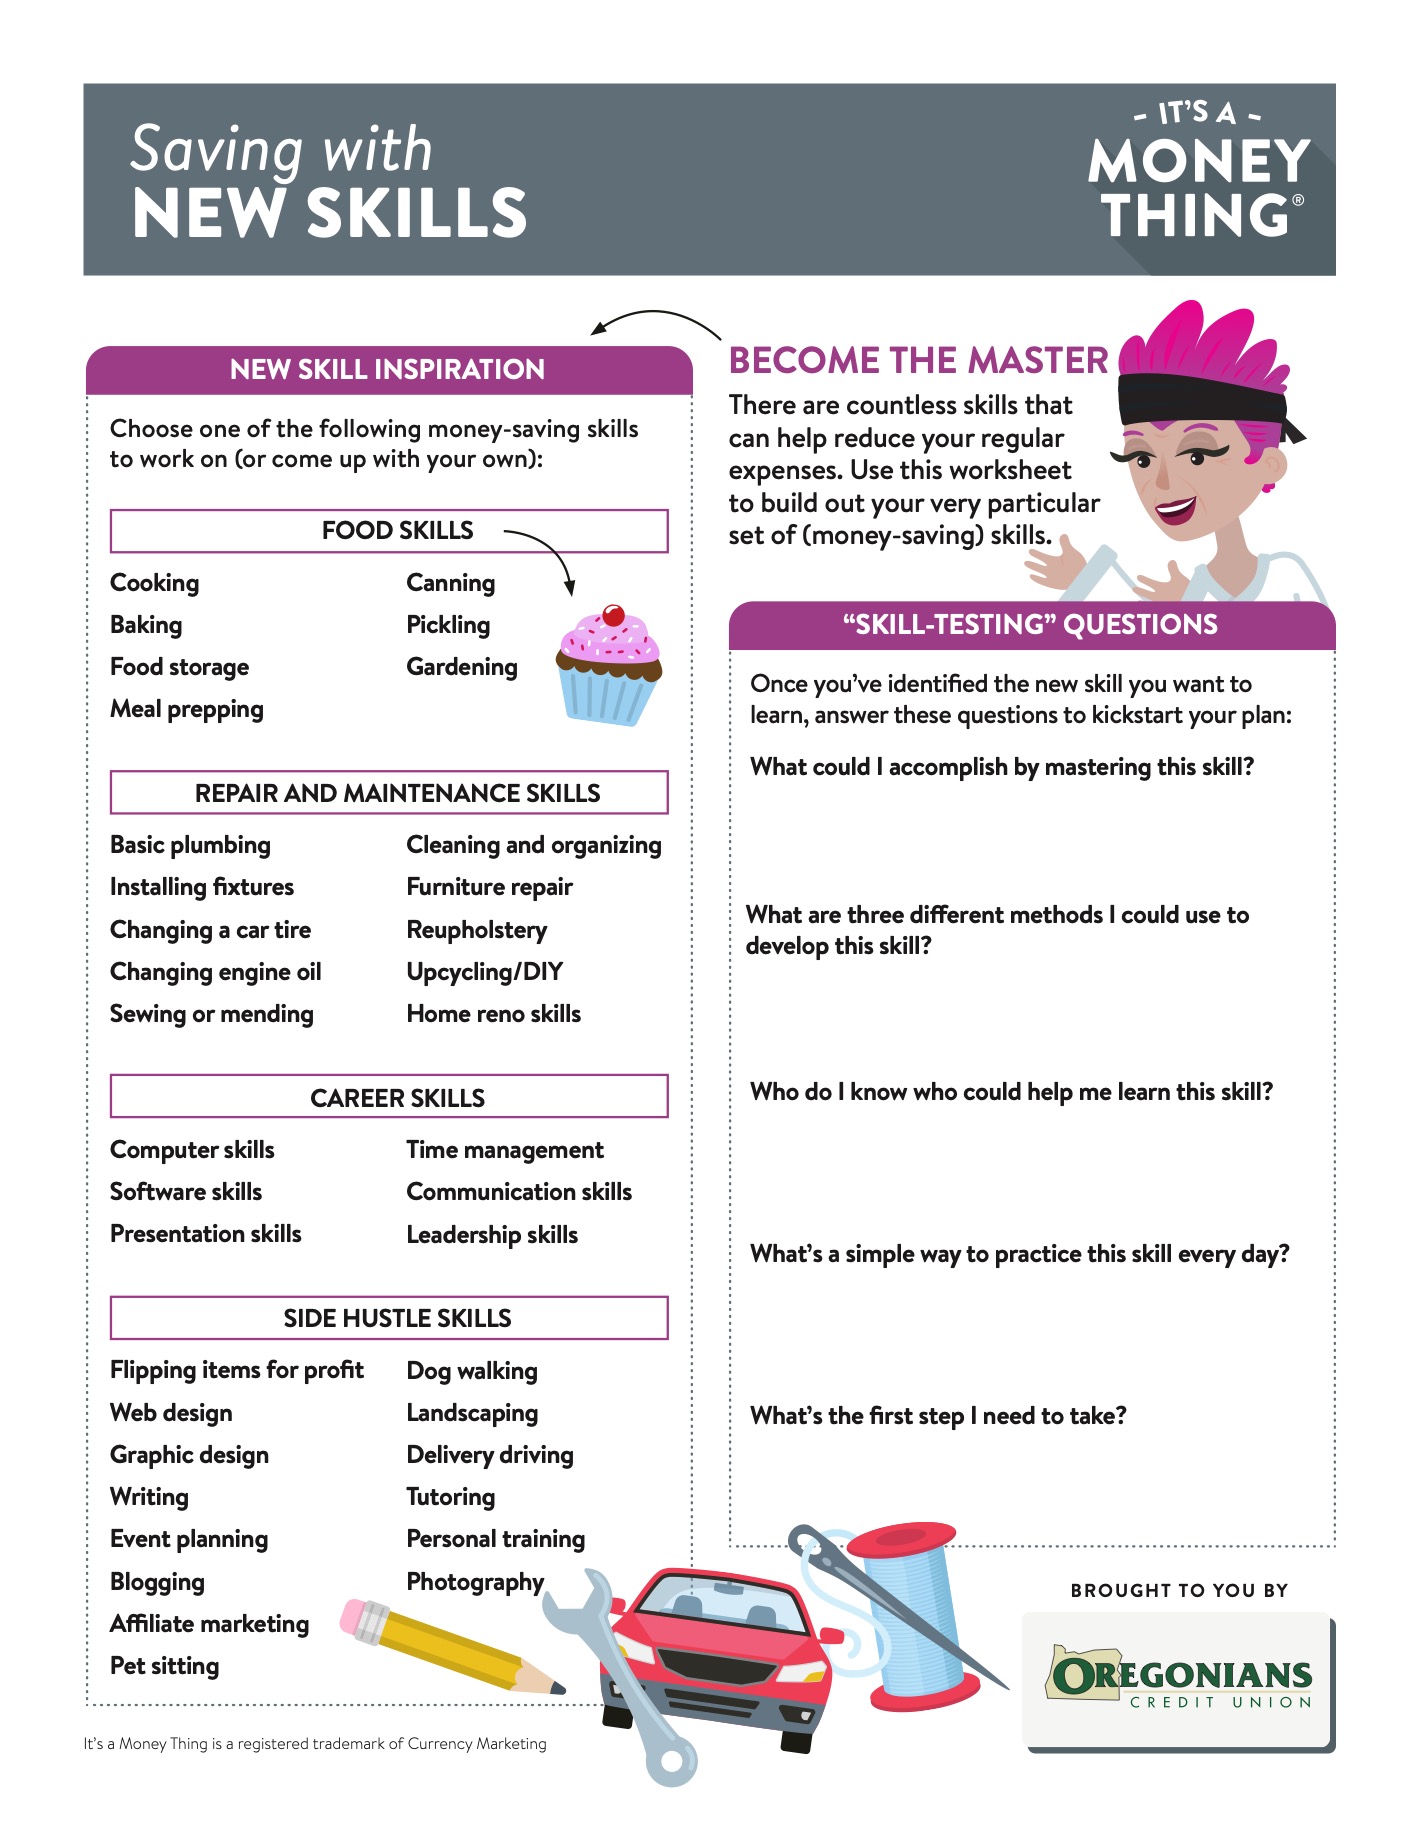 Build out your money-saving skills worksheet